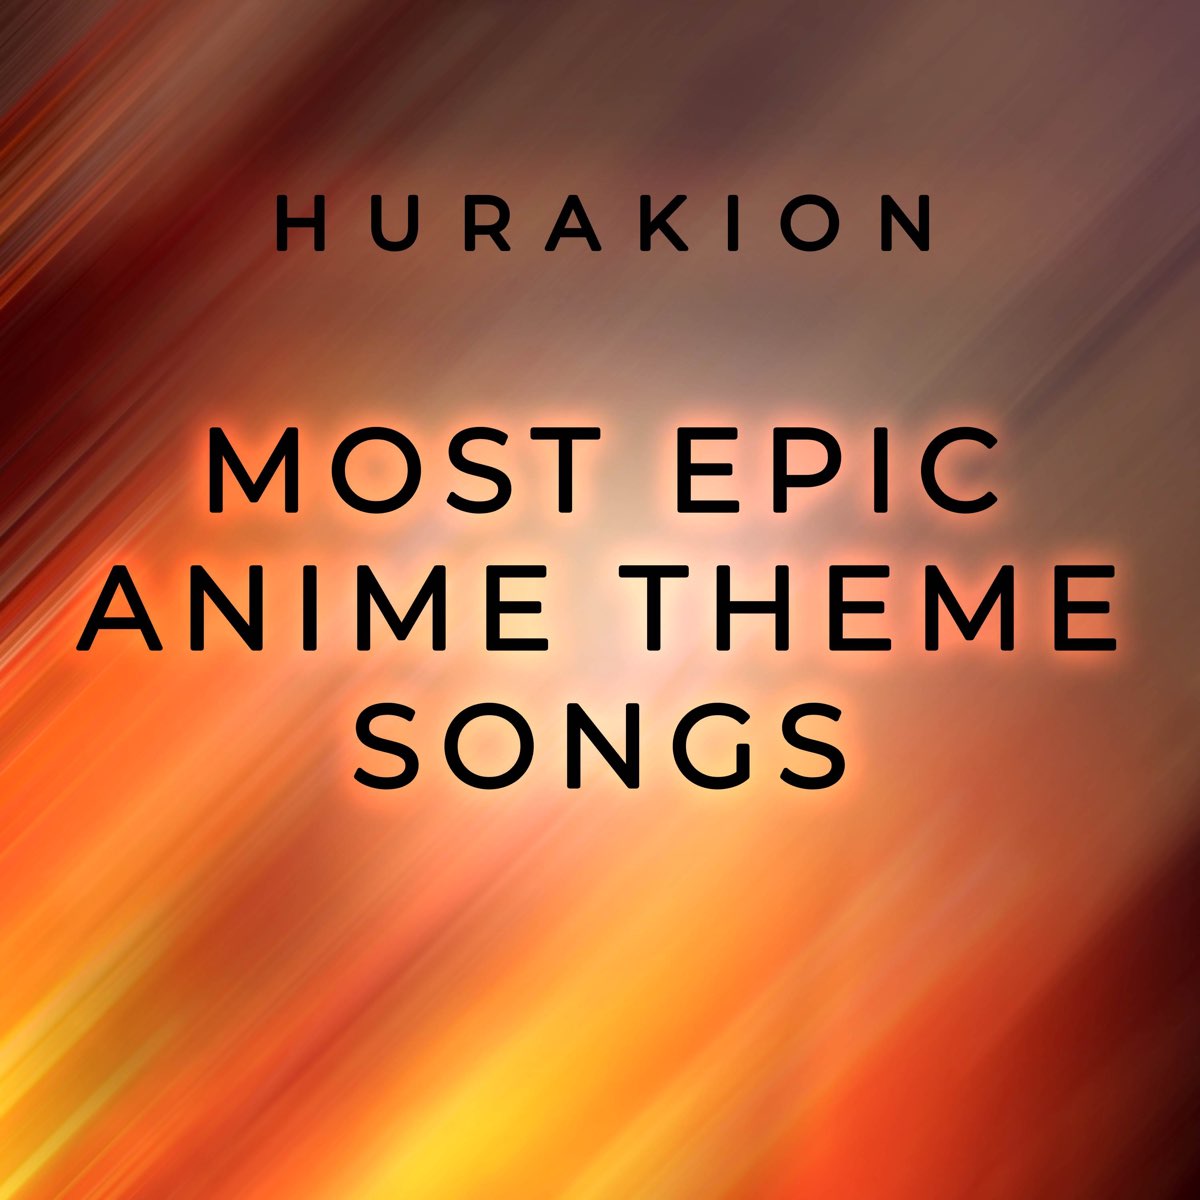 Most Epic Anime Theme Songs by Hurakion on Apple Music